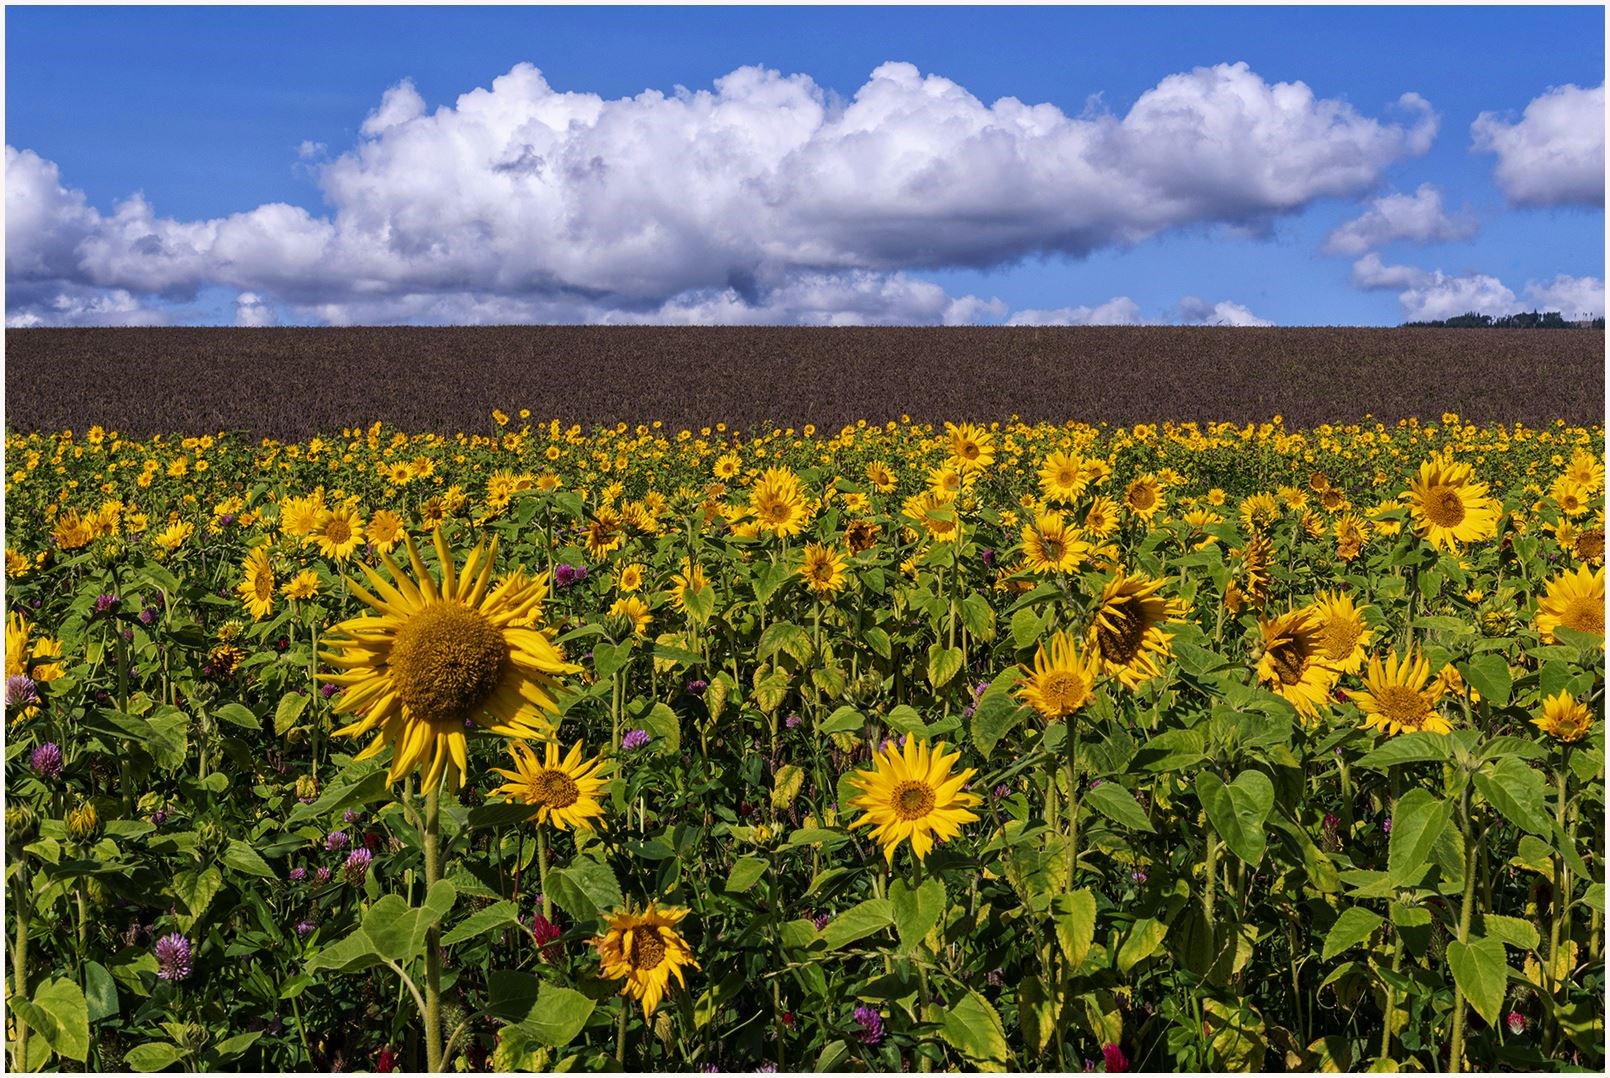 A colourful field of sunflowers near Drummond Farm as seen by Linda Ross.